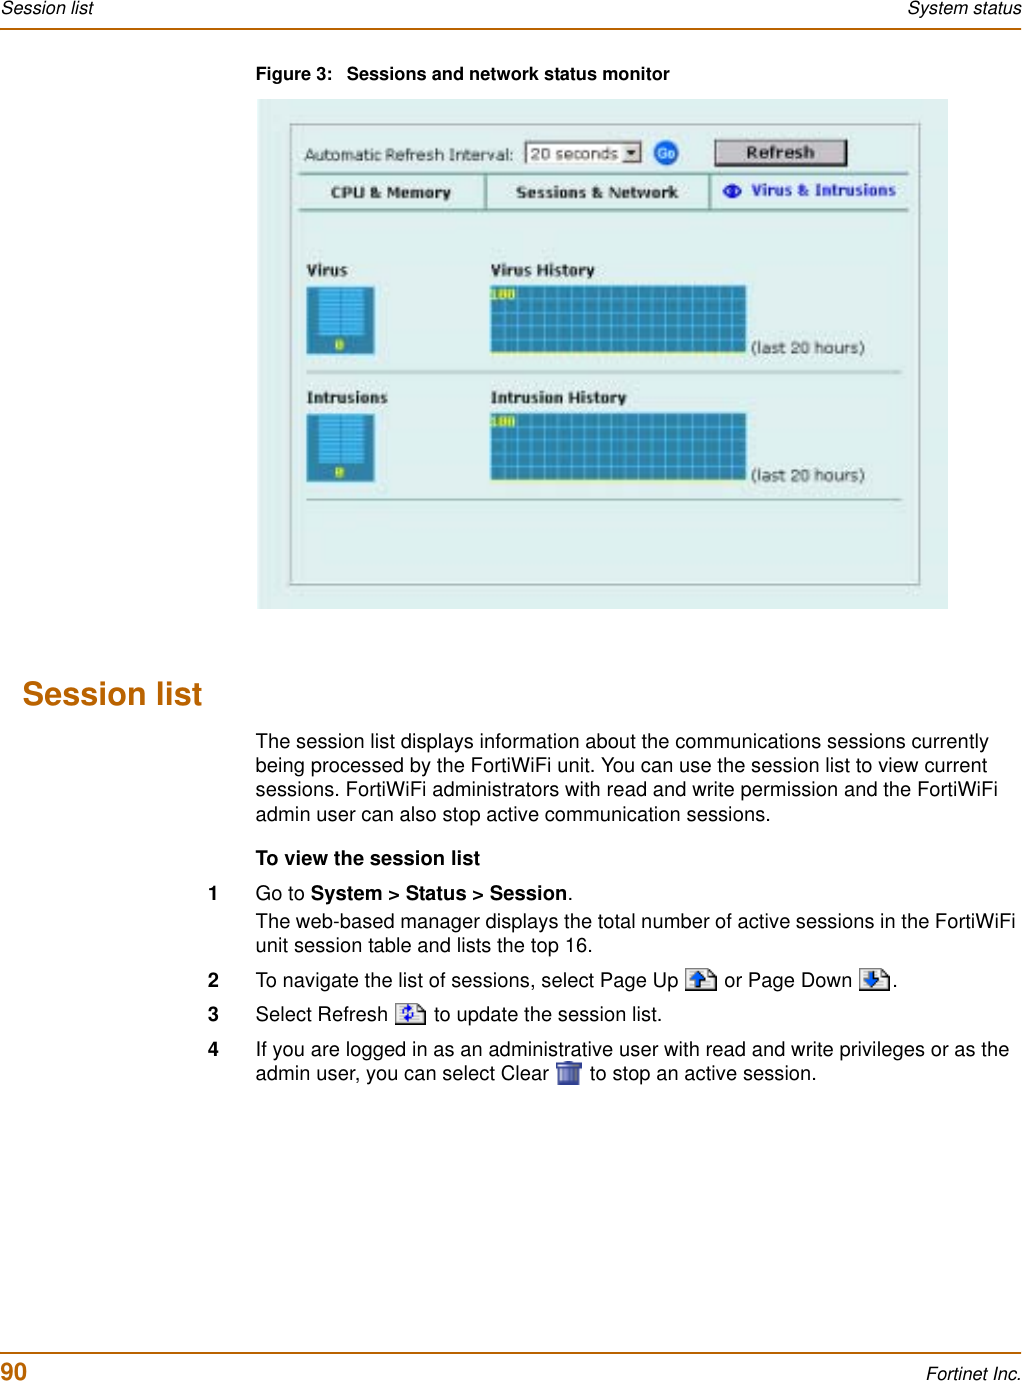 90 Fortinet Inc.Session list System statusFigure 3: Sessions and network status monitorSession listThe session list displays information about the communications sessions currently being processed by the FortiWiFi unit. You can use the session list to view current sessions. FortiWiFi administrators with read and write permission and the FortiWiFi admin user can also stop active communication sessions.To view the session list1Go to System &gt; Status &gt; Session.The web-based manager displays the total number of active sessions in the FortiWiFi unit session table and lists the top 16.2To navigate the list of sessions, select Page Up   or Page Down  .3Select Refresh   to update the session list.4If you are logged in as an administrative user with read and write privileges or as the admin user, you can select Clear   to stop an active session.